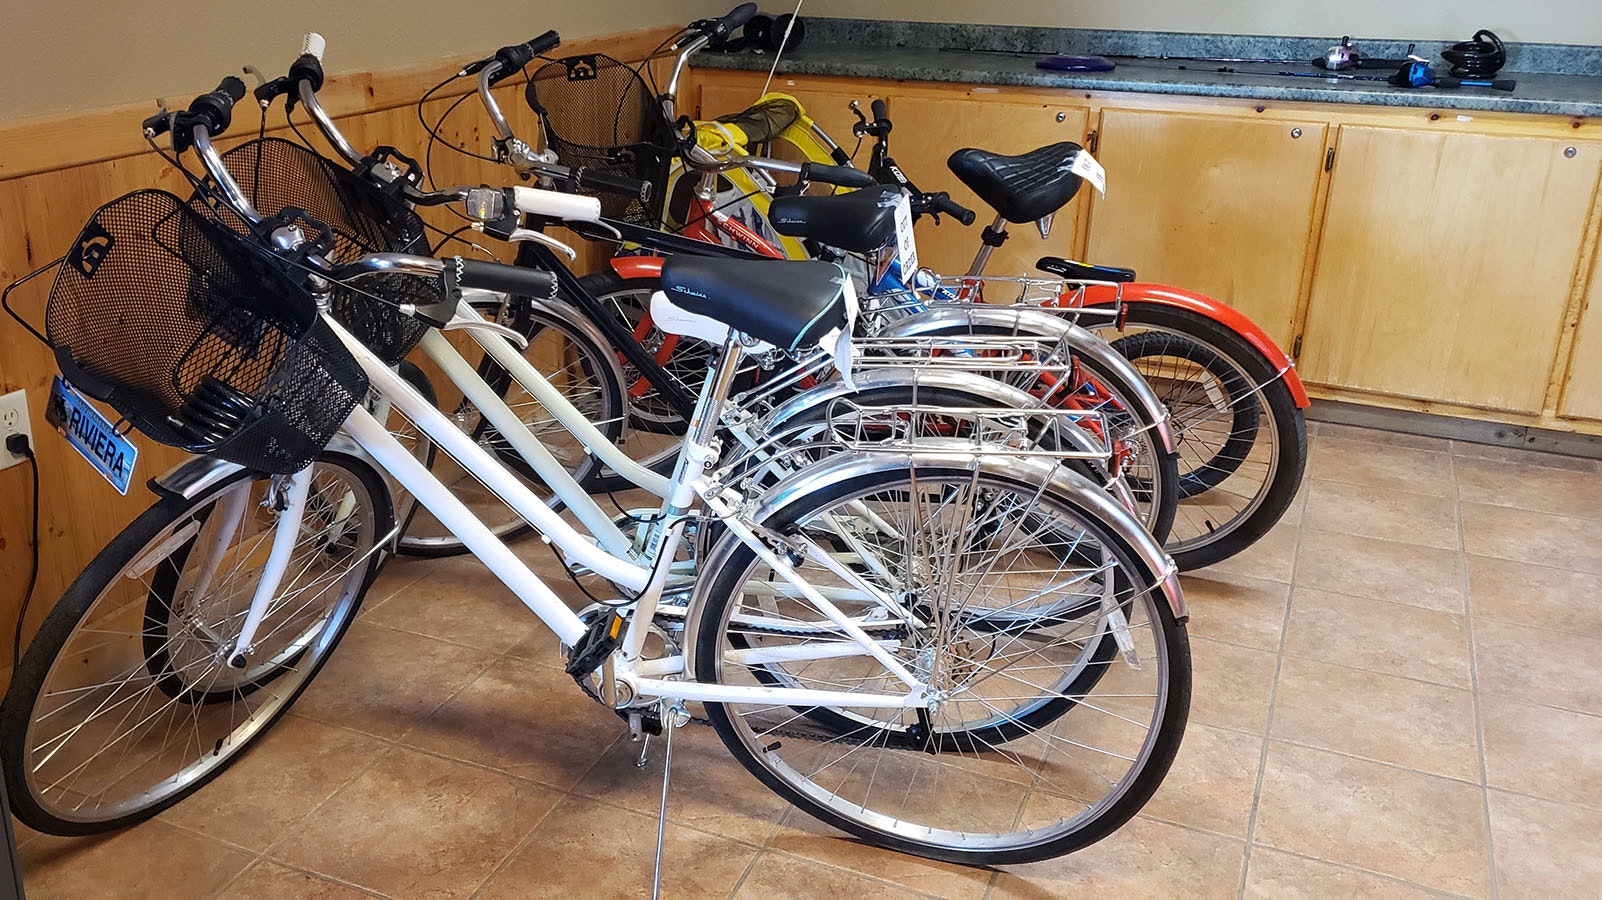 A gear garage is available for complimentary rentals of bicycle equipment fishing gear and other such items.